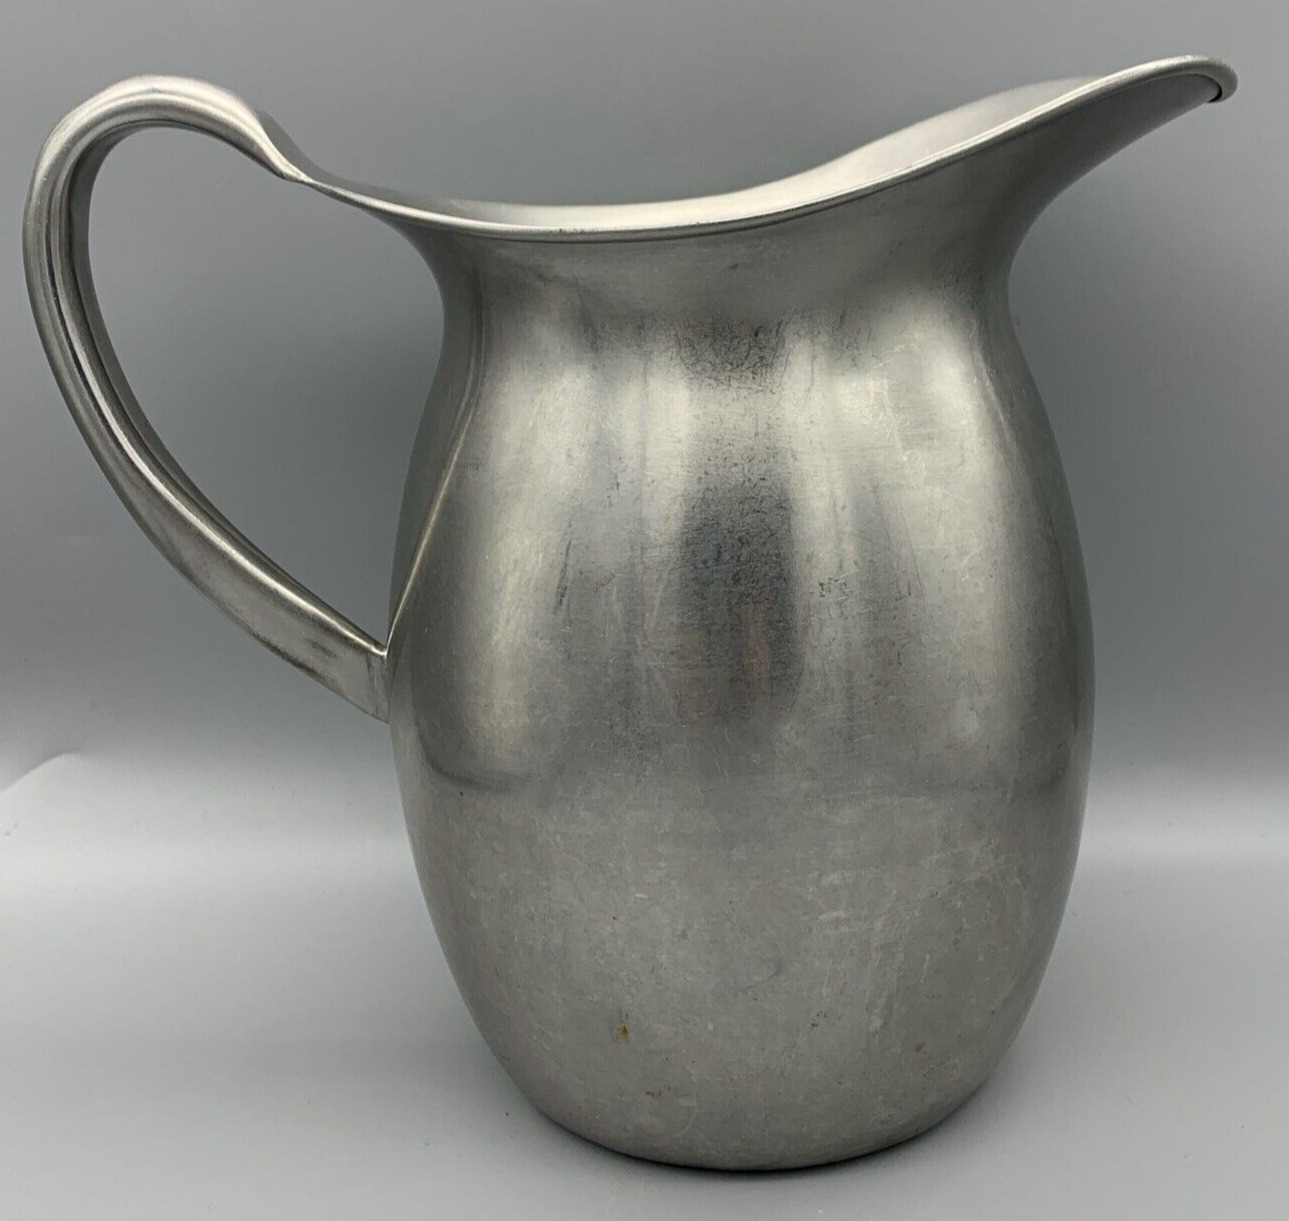 The Vollrath Co. stainless steel pitcher Vintage large 9 inches tall WWII USAMD